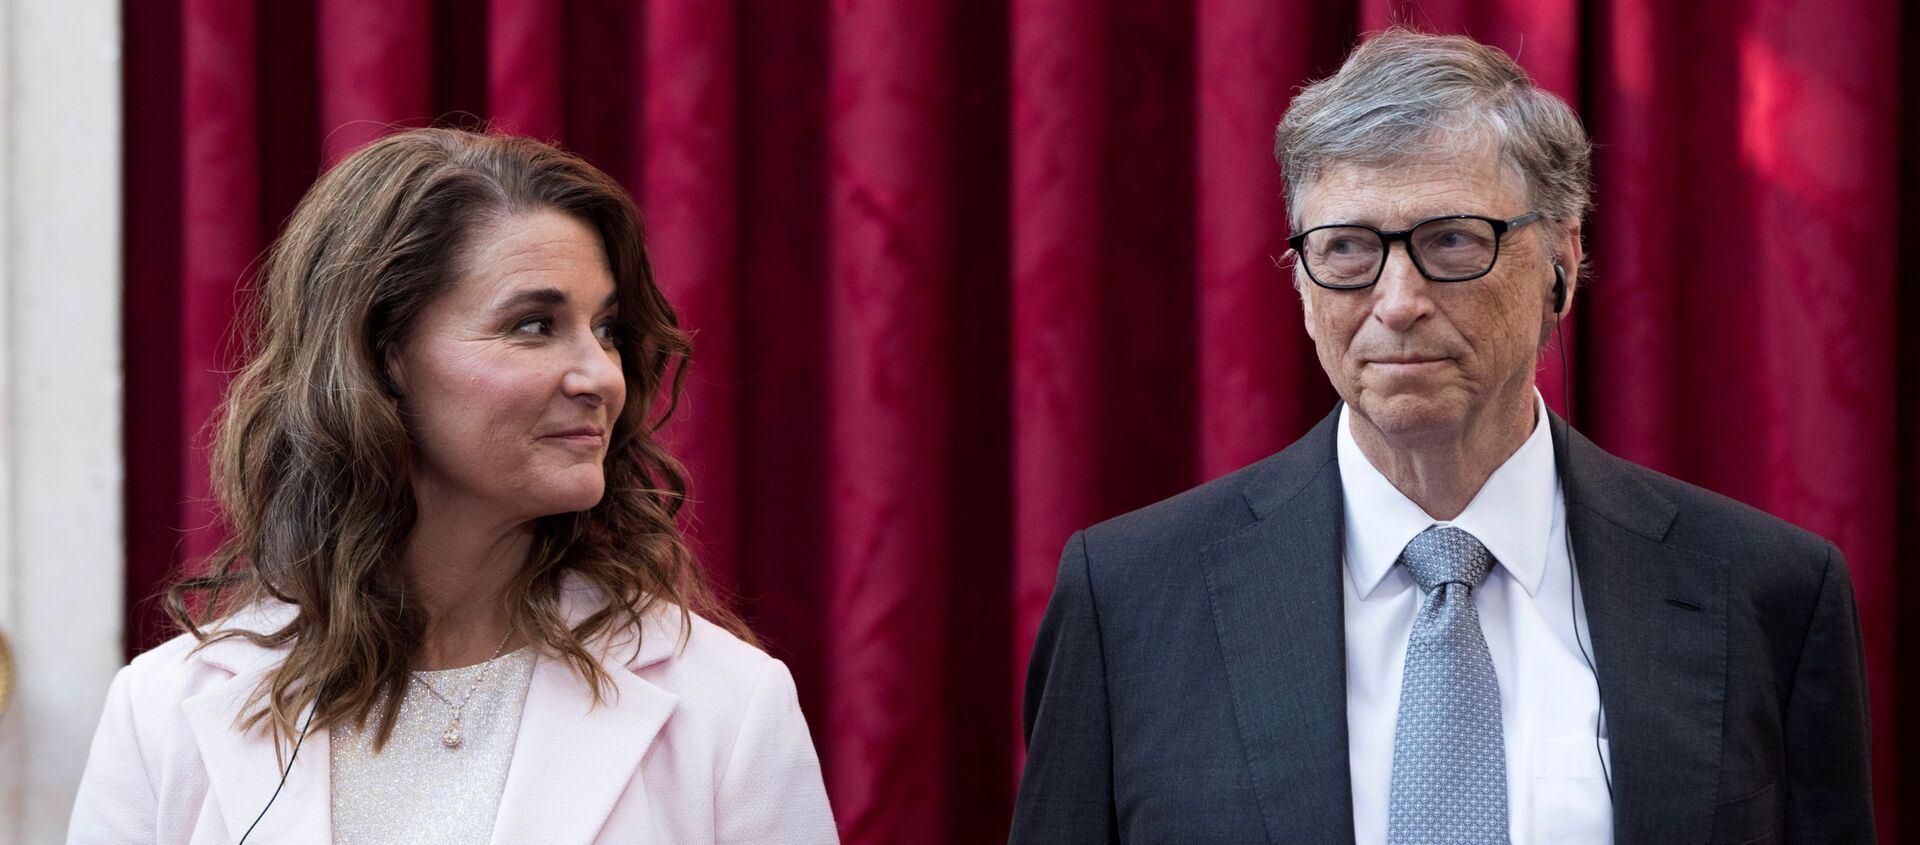 Philanthropist and co-founder of Microsoft Bill Gates (R) and his wife Melinda listen to a speech by French President Francois Hollande, prior to being awarded Commanders of the Legion of Honor at the Elysee Palace in Paris, France, 21 April 2017 - Sputnik International, 1920, 08.05.2021